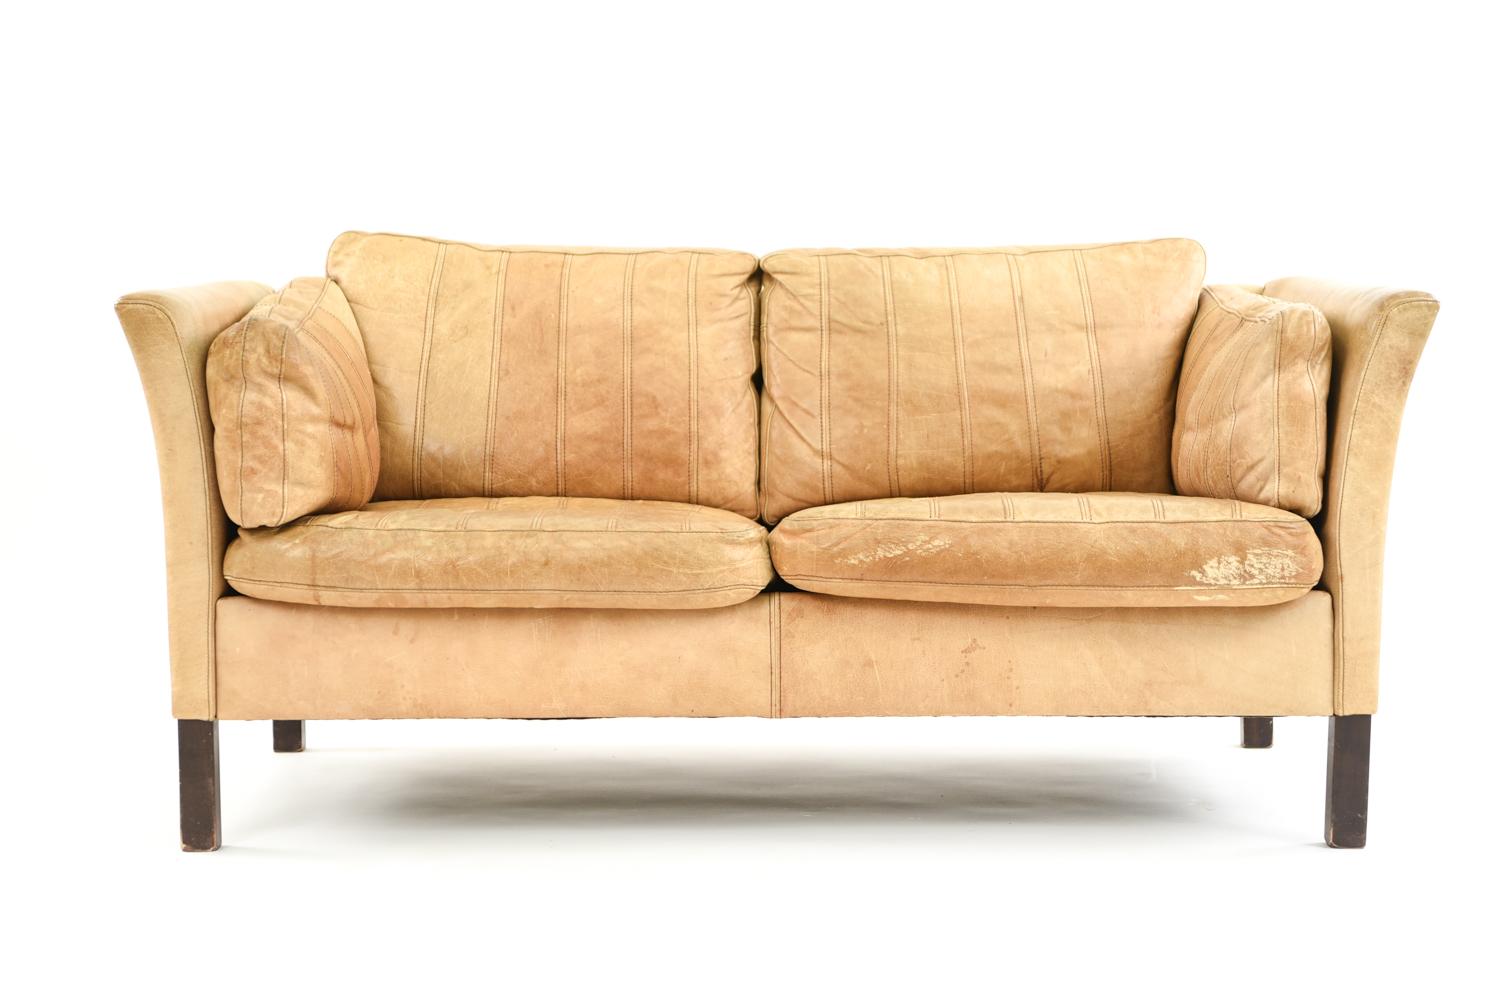 This beautiful Mogens Hansen sofa suite in supple butterscotch leather is the perfect way to create a cohesive interior space with matching seating. The seams on the leather create a visually interesting texture.